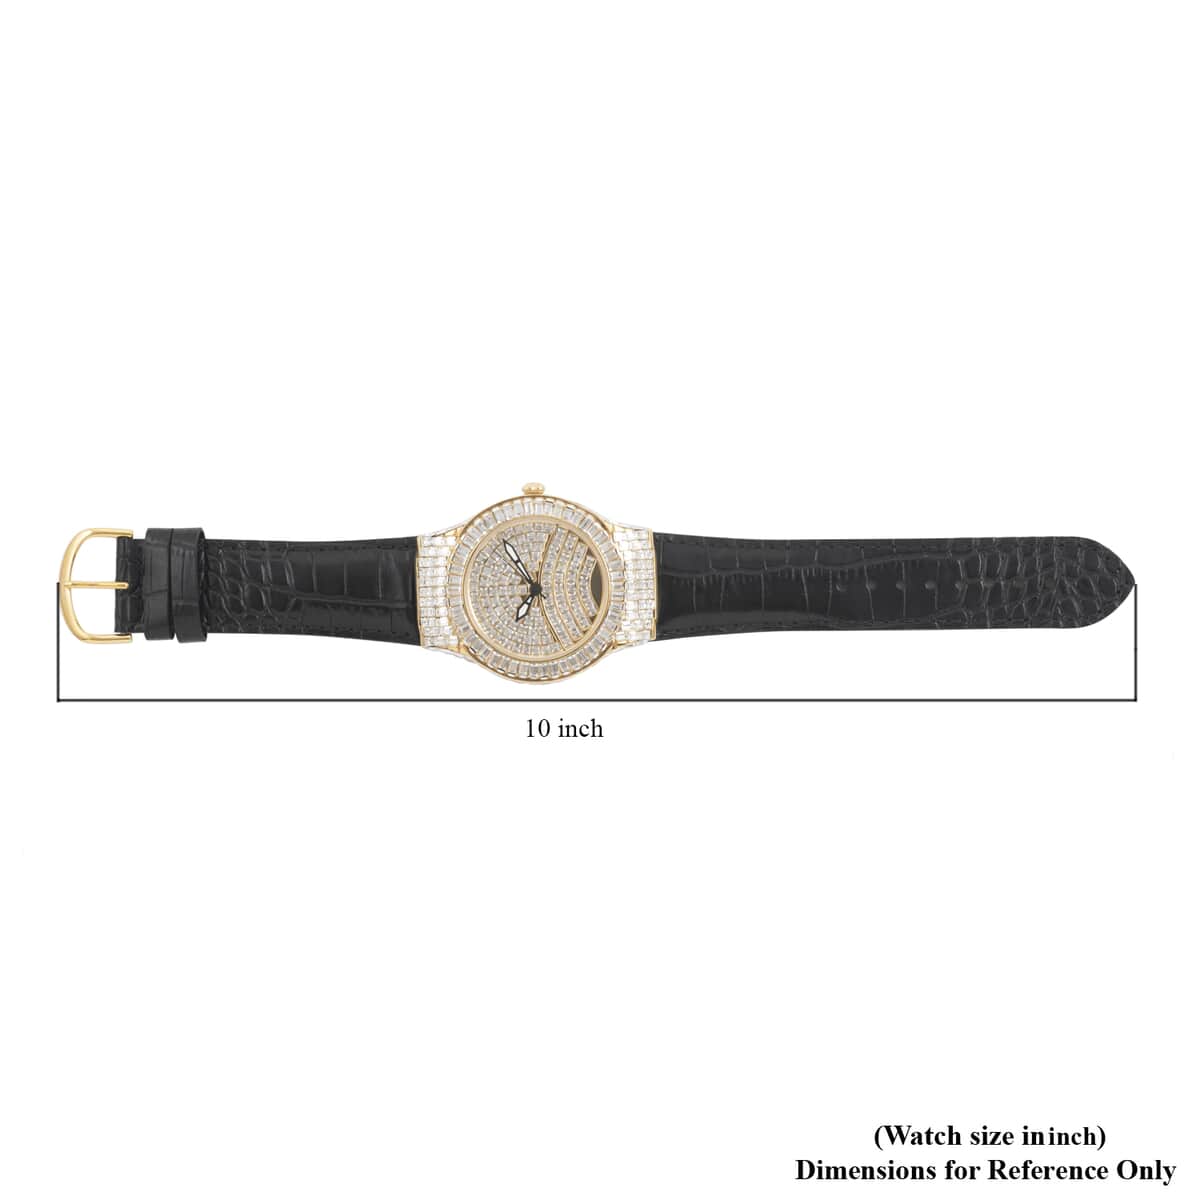 ADEE KAYE Austrian Crystal Japan Quartz Movement Goldtone Dial Watch in Black Leather Band (26 mm) image number 5